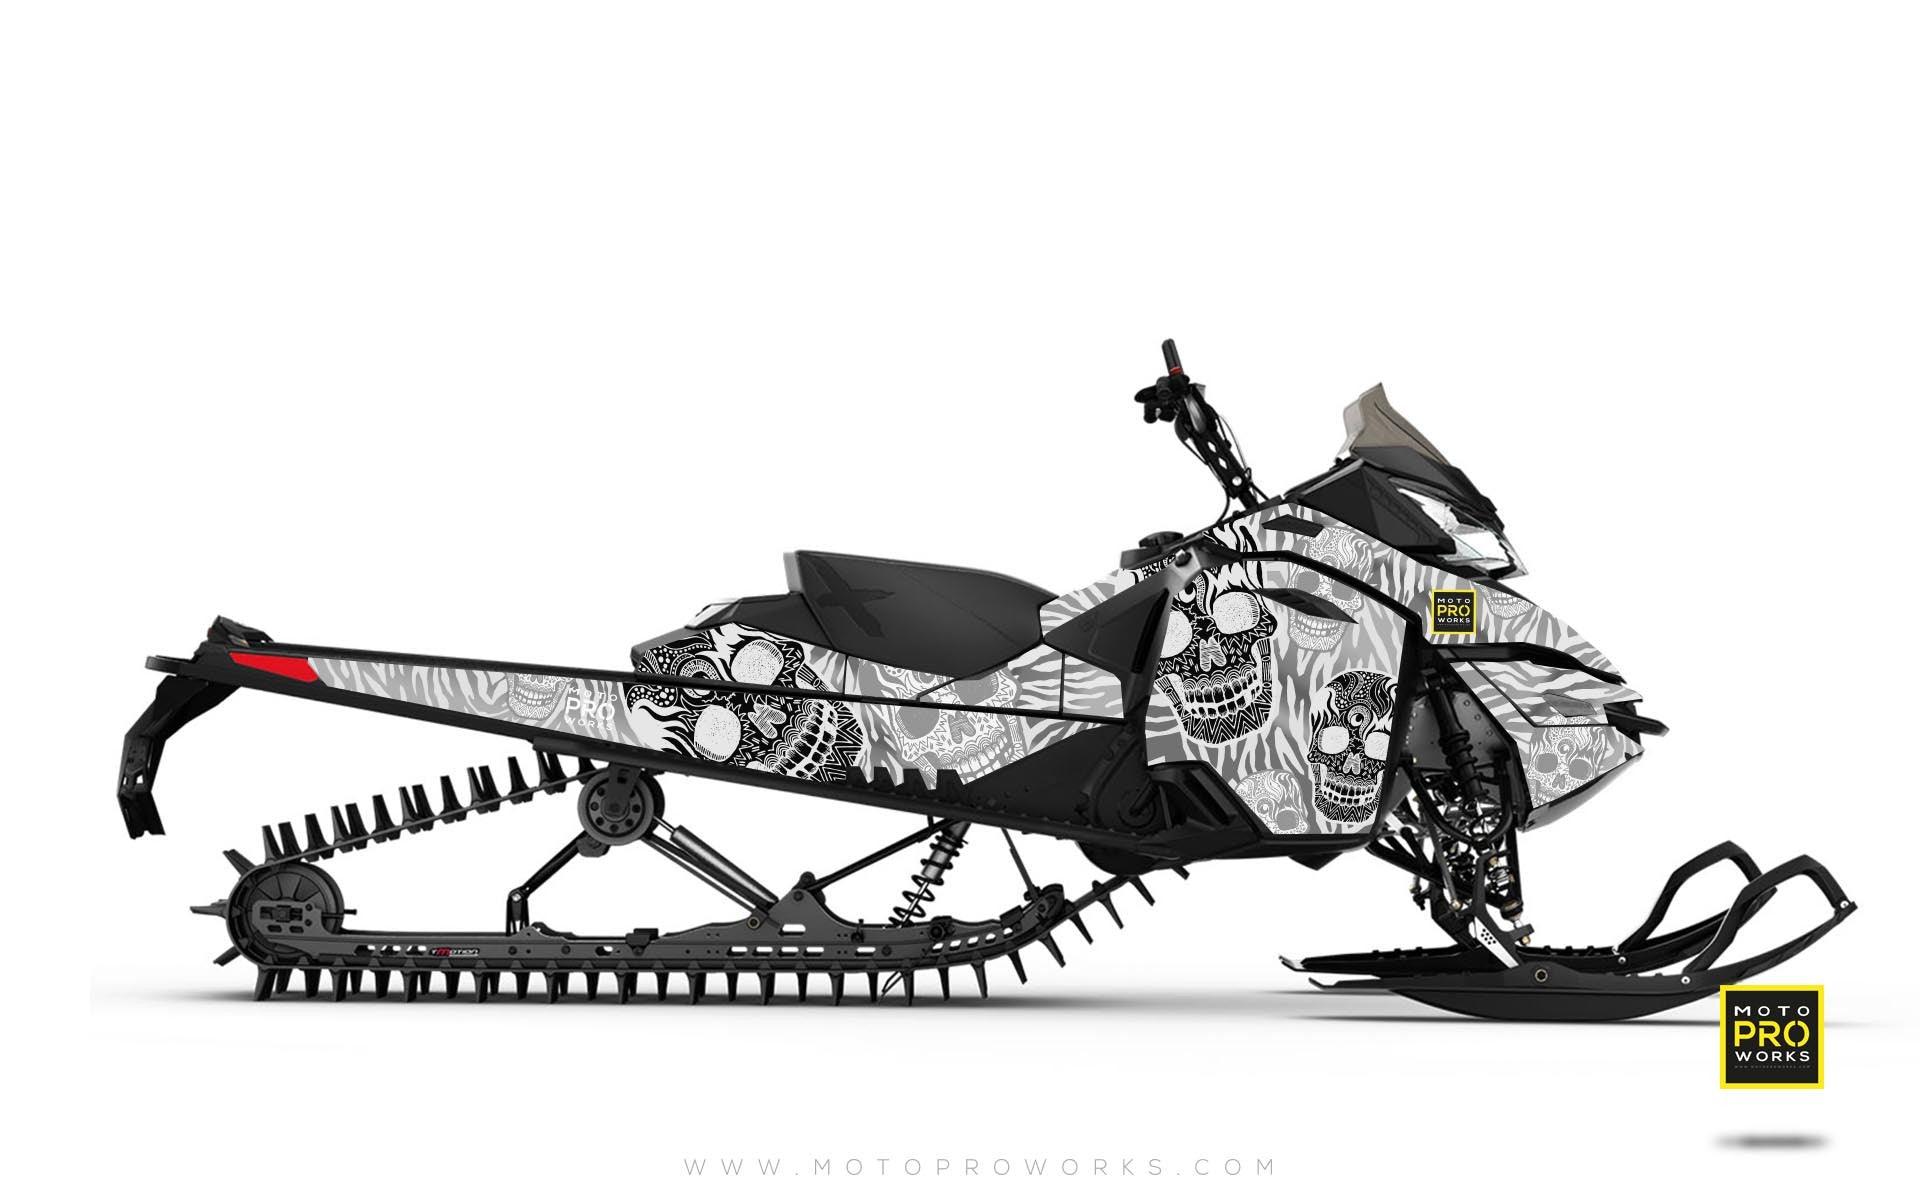 Ski-Doo Graphics - "Fiesta" (white solid) - MotoProWorks | Decals and Bike Graphic kit